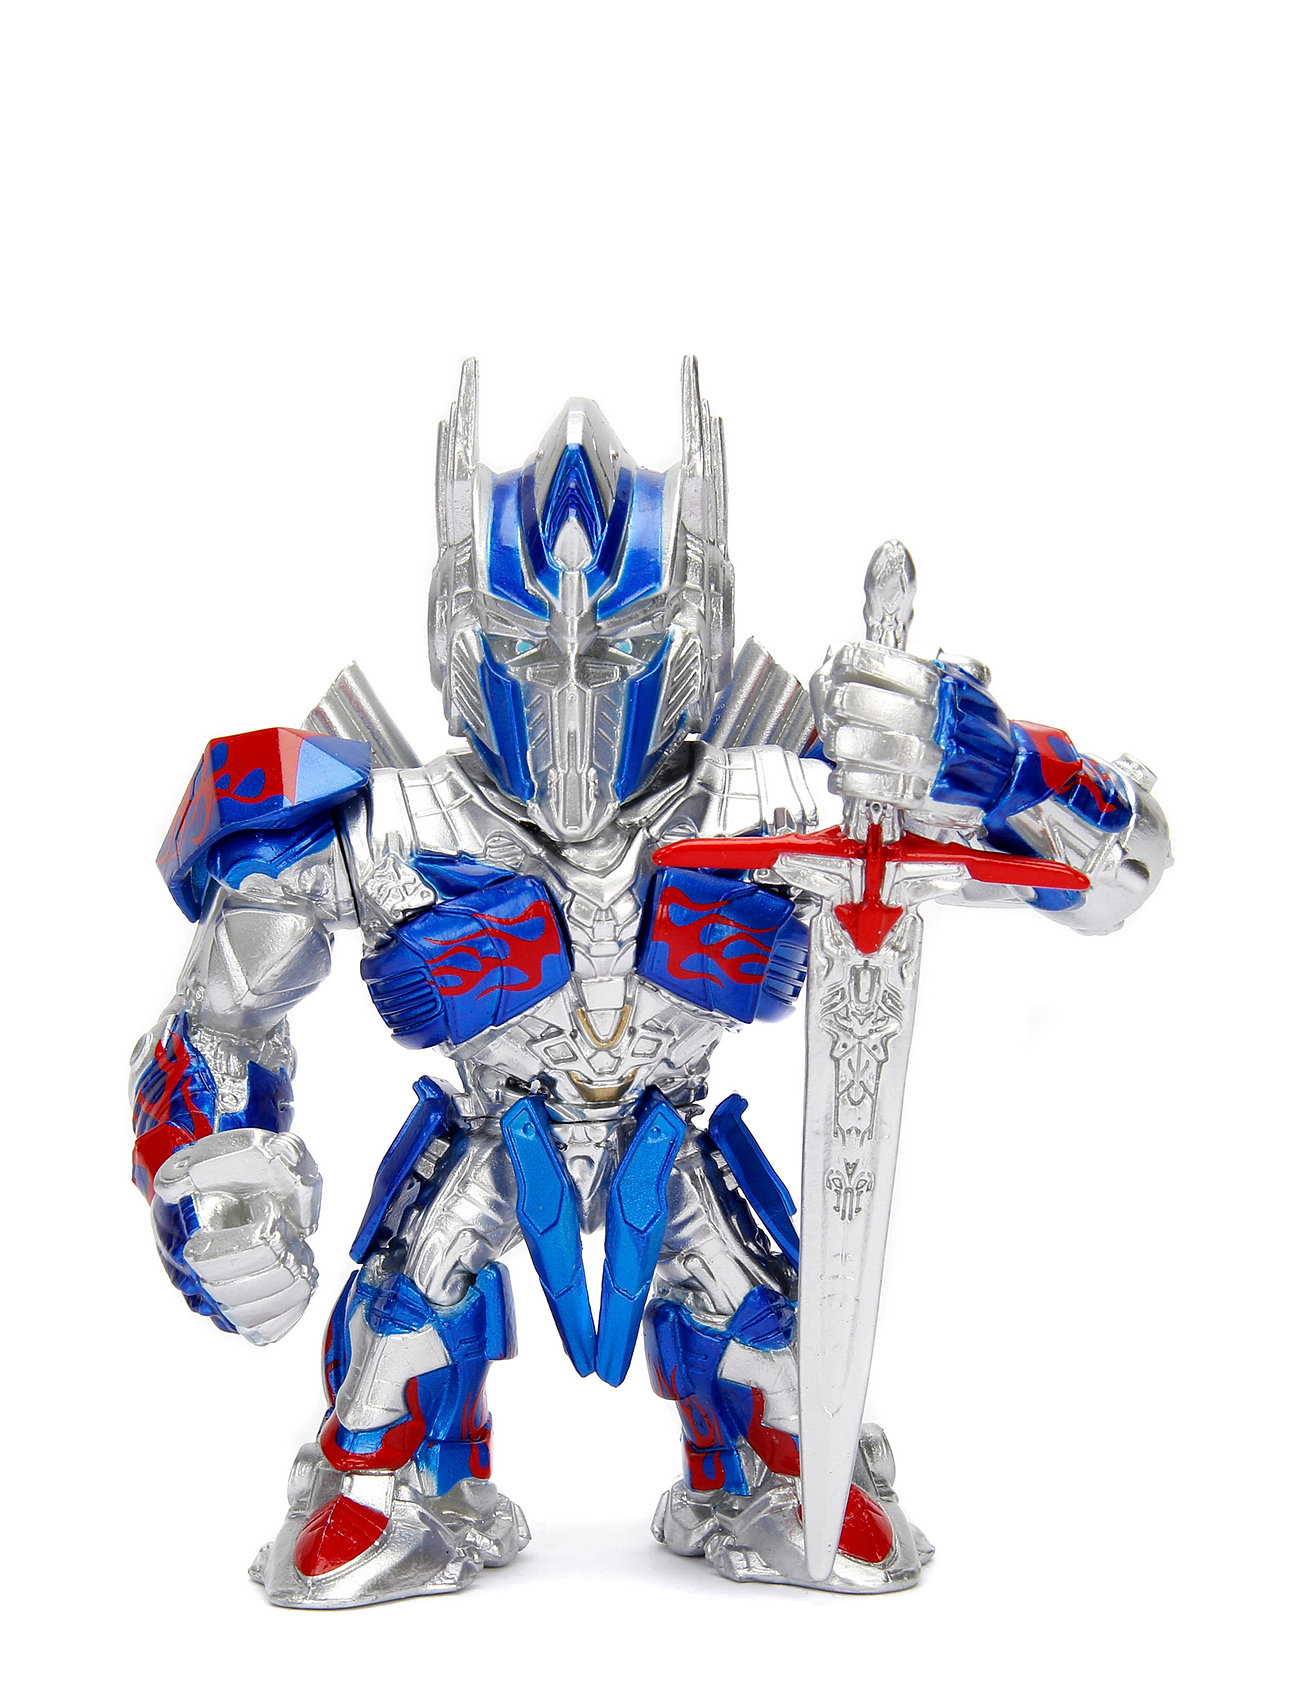 Transformers 4" Optimus Prime Toys Playsets & Action Figures Action Figures Multi/patterned Jada Toys